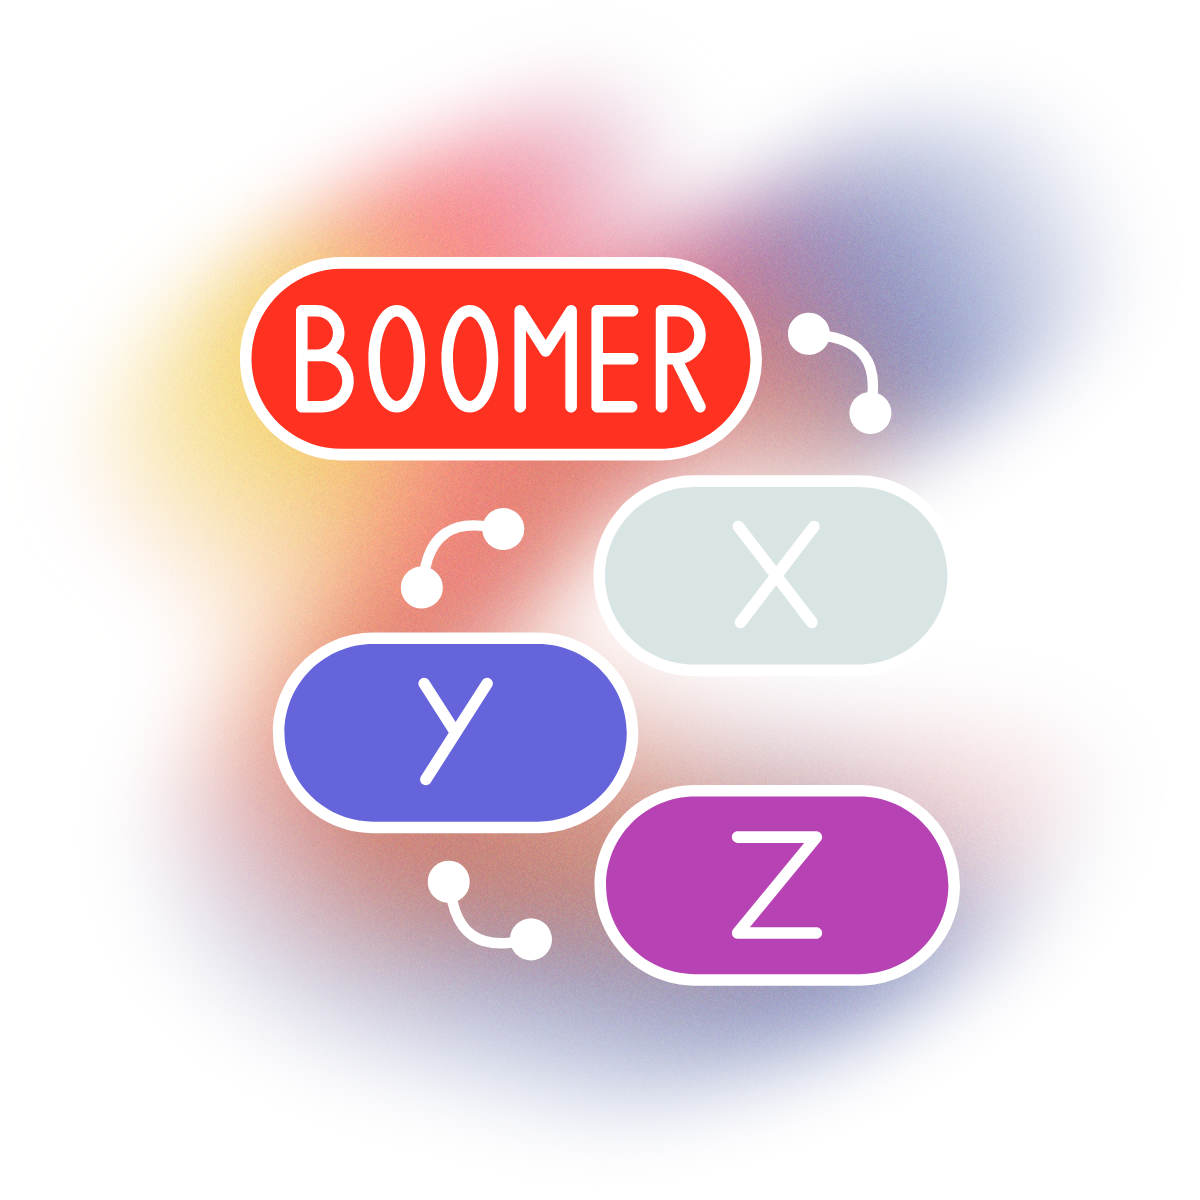 Image listing the generations mentioned (boomer, x, y, z)